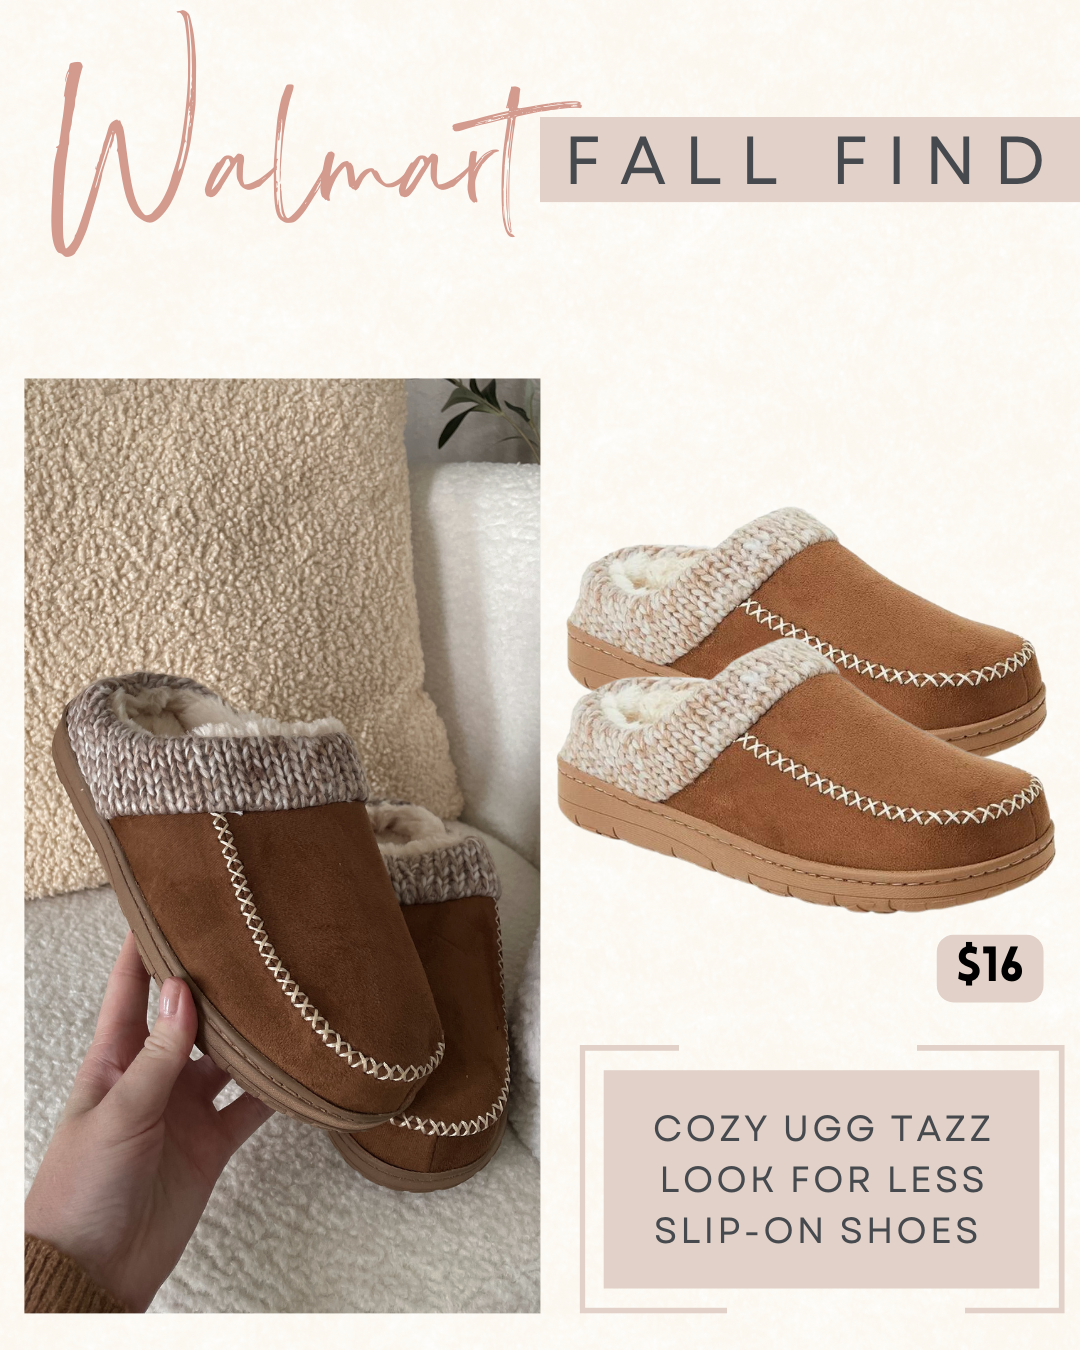 Dearfoams Cozy Comfort Women's Moc Toe Clog With Chunky Knit Collar Slippers | Women's Fall Fashion at Walmart. Top 10 Purchases from Walmart for Fall 2023